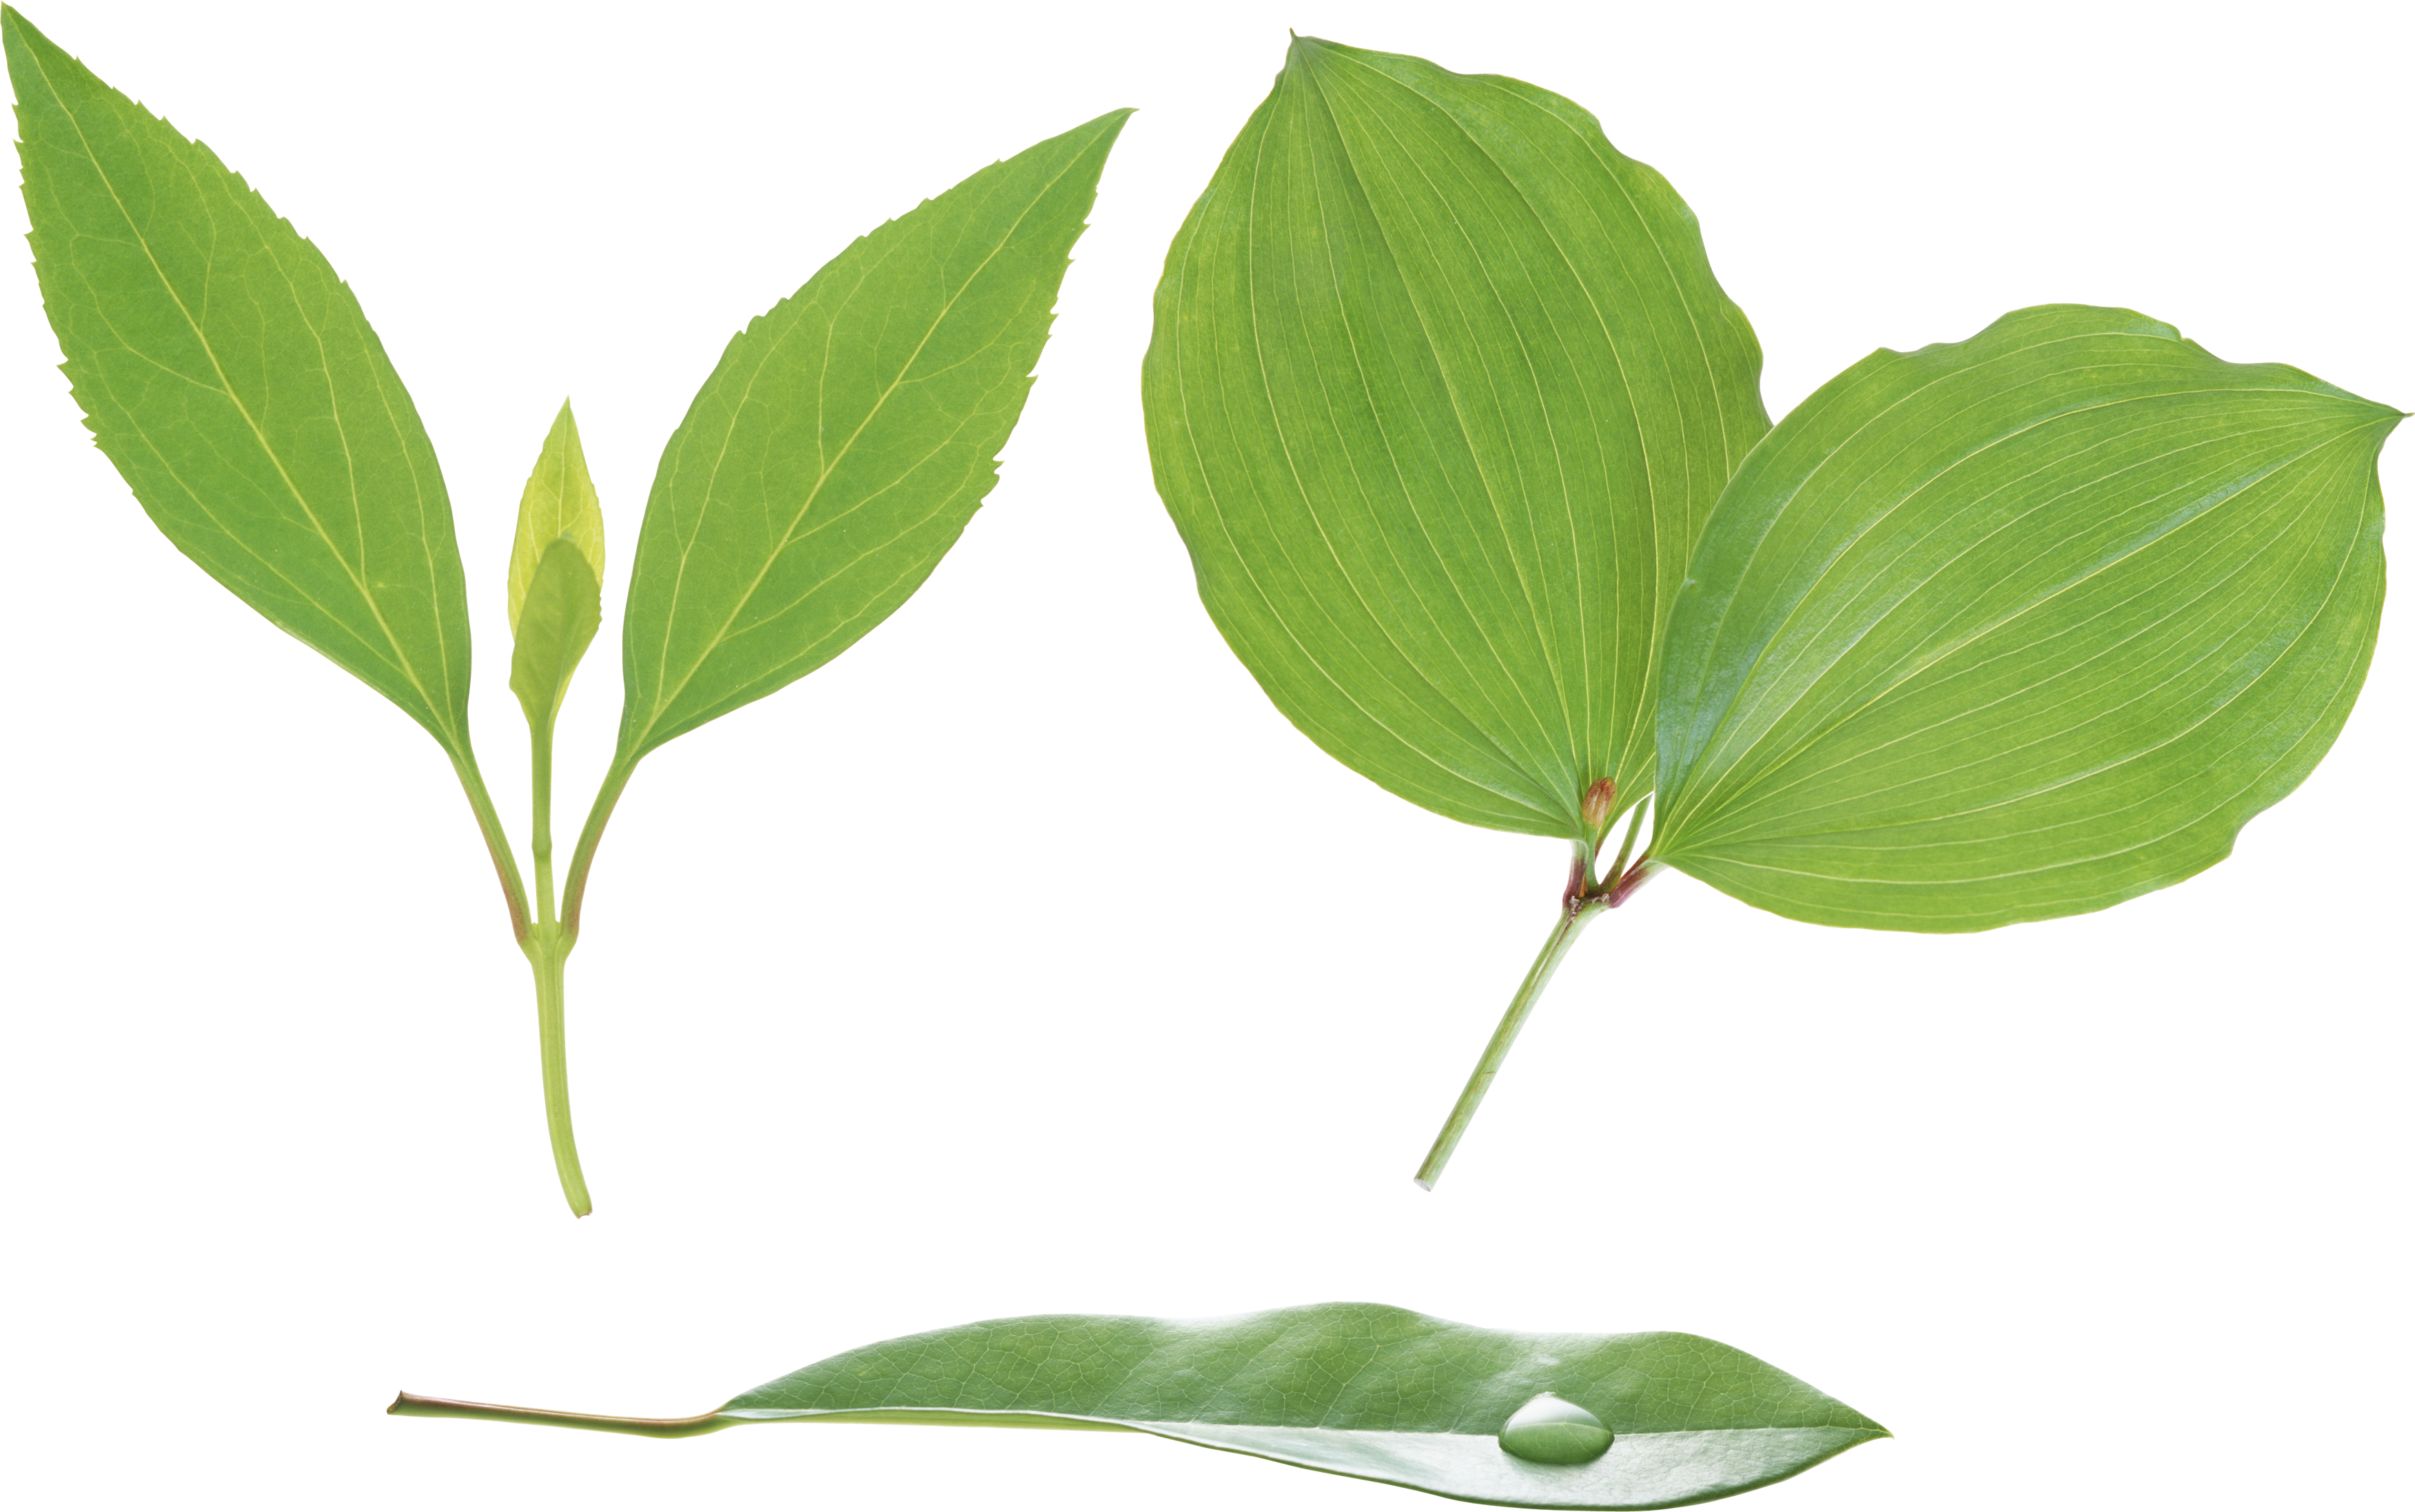 Green leaves png image. Laurel clipart foliage